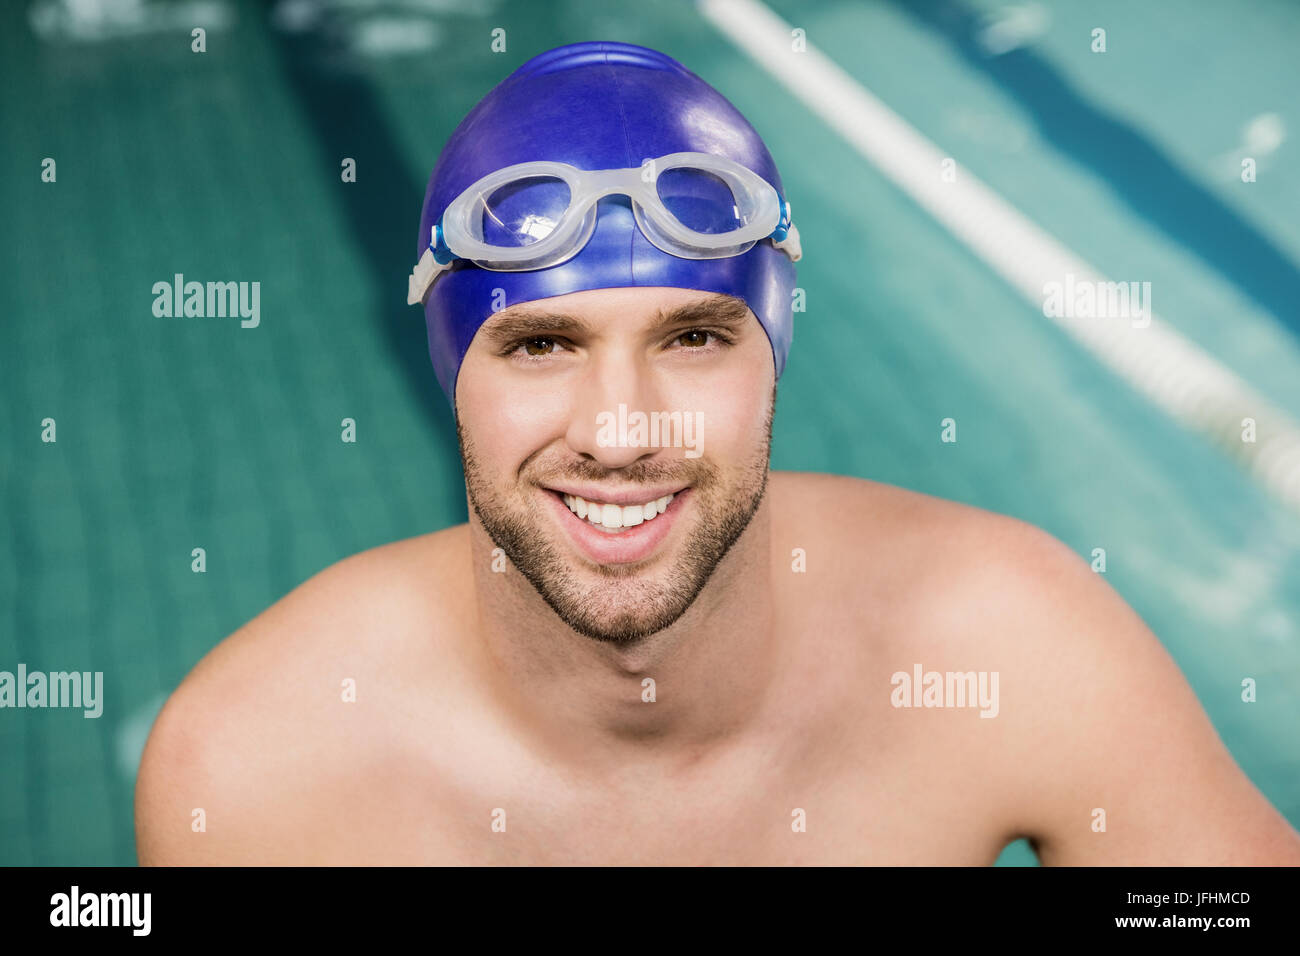 Portrait of swimmer wearing swimming goggles and cap Stock Photo